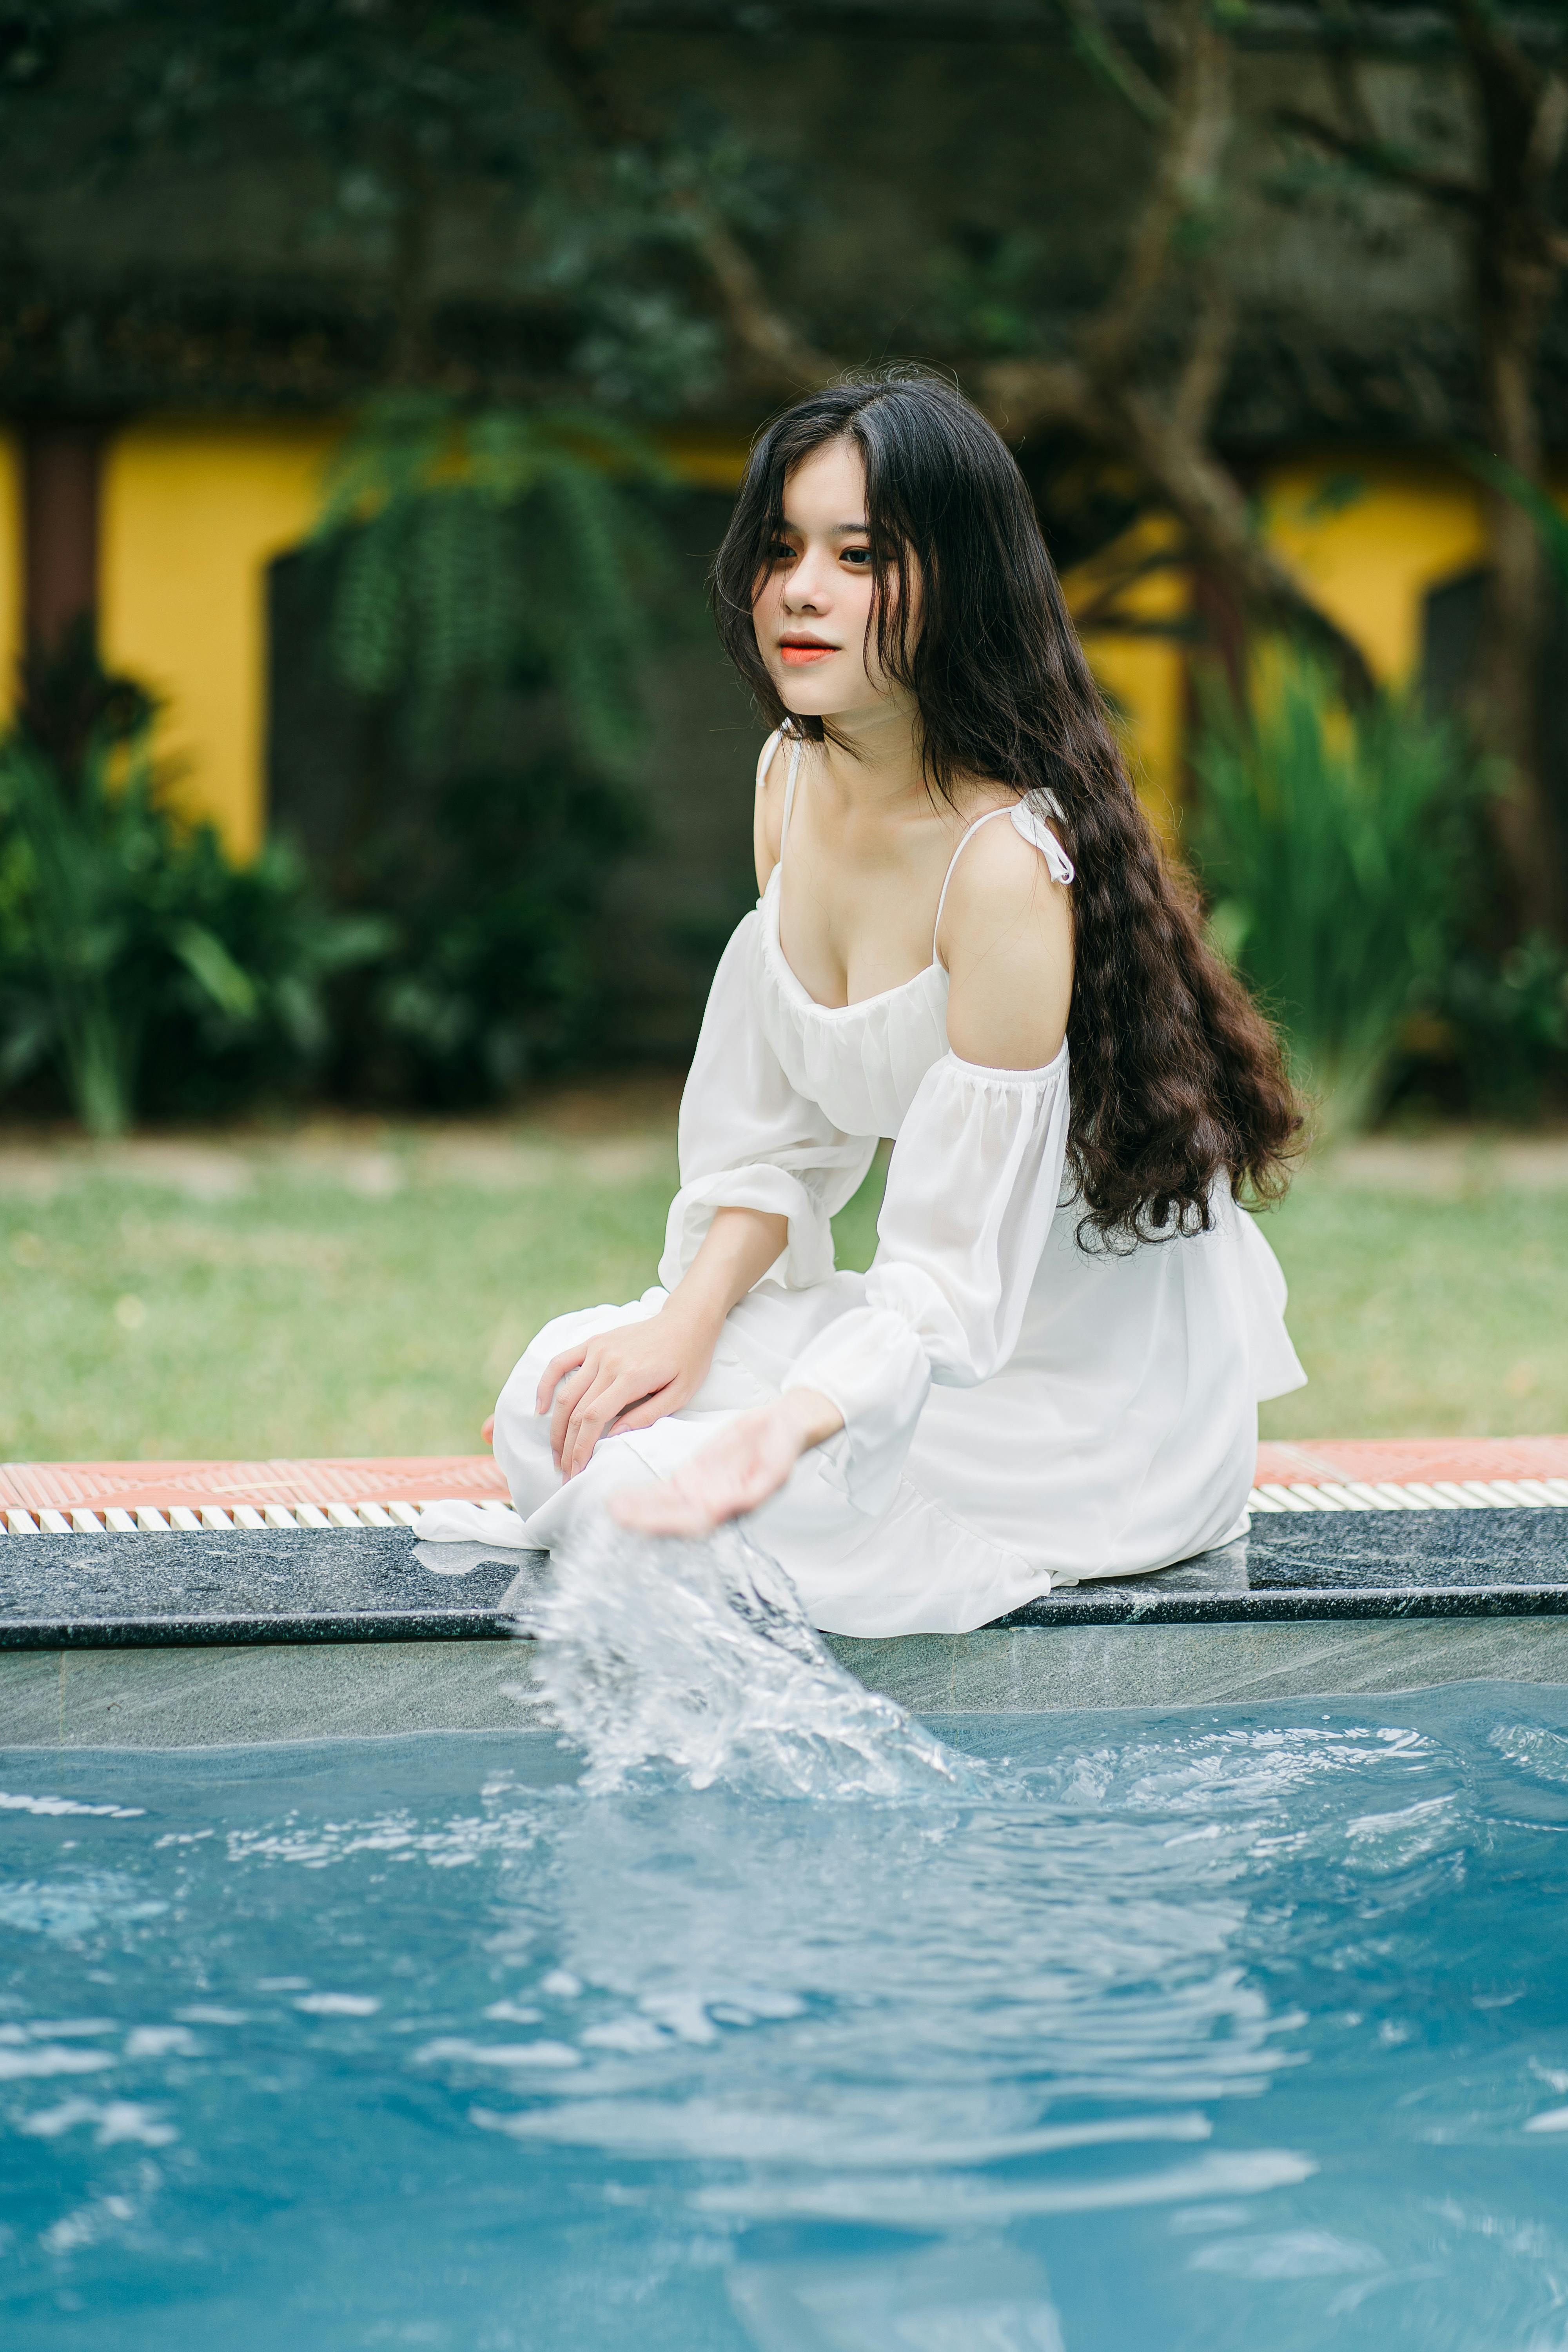 Long Legged Asian Girl Sits by Water Feature Stock Image - Image